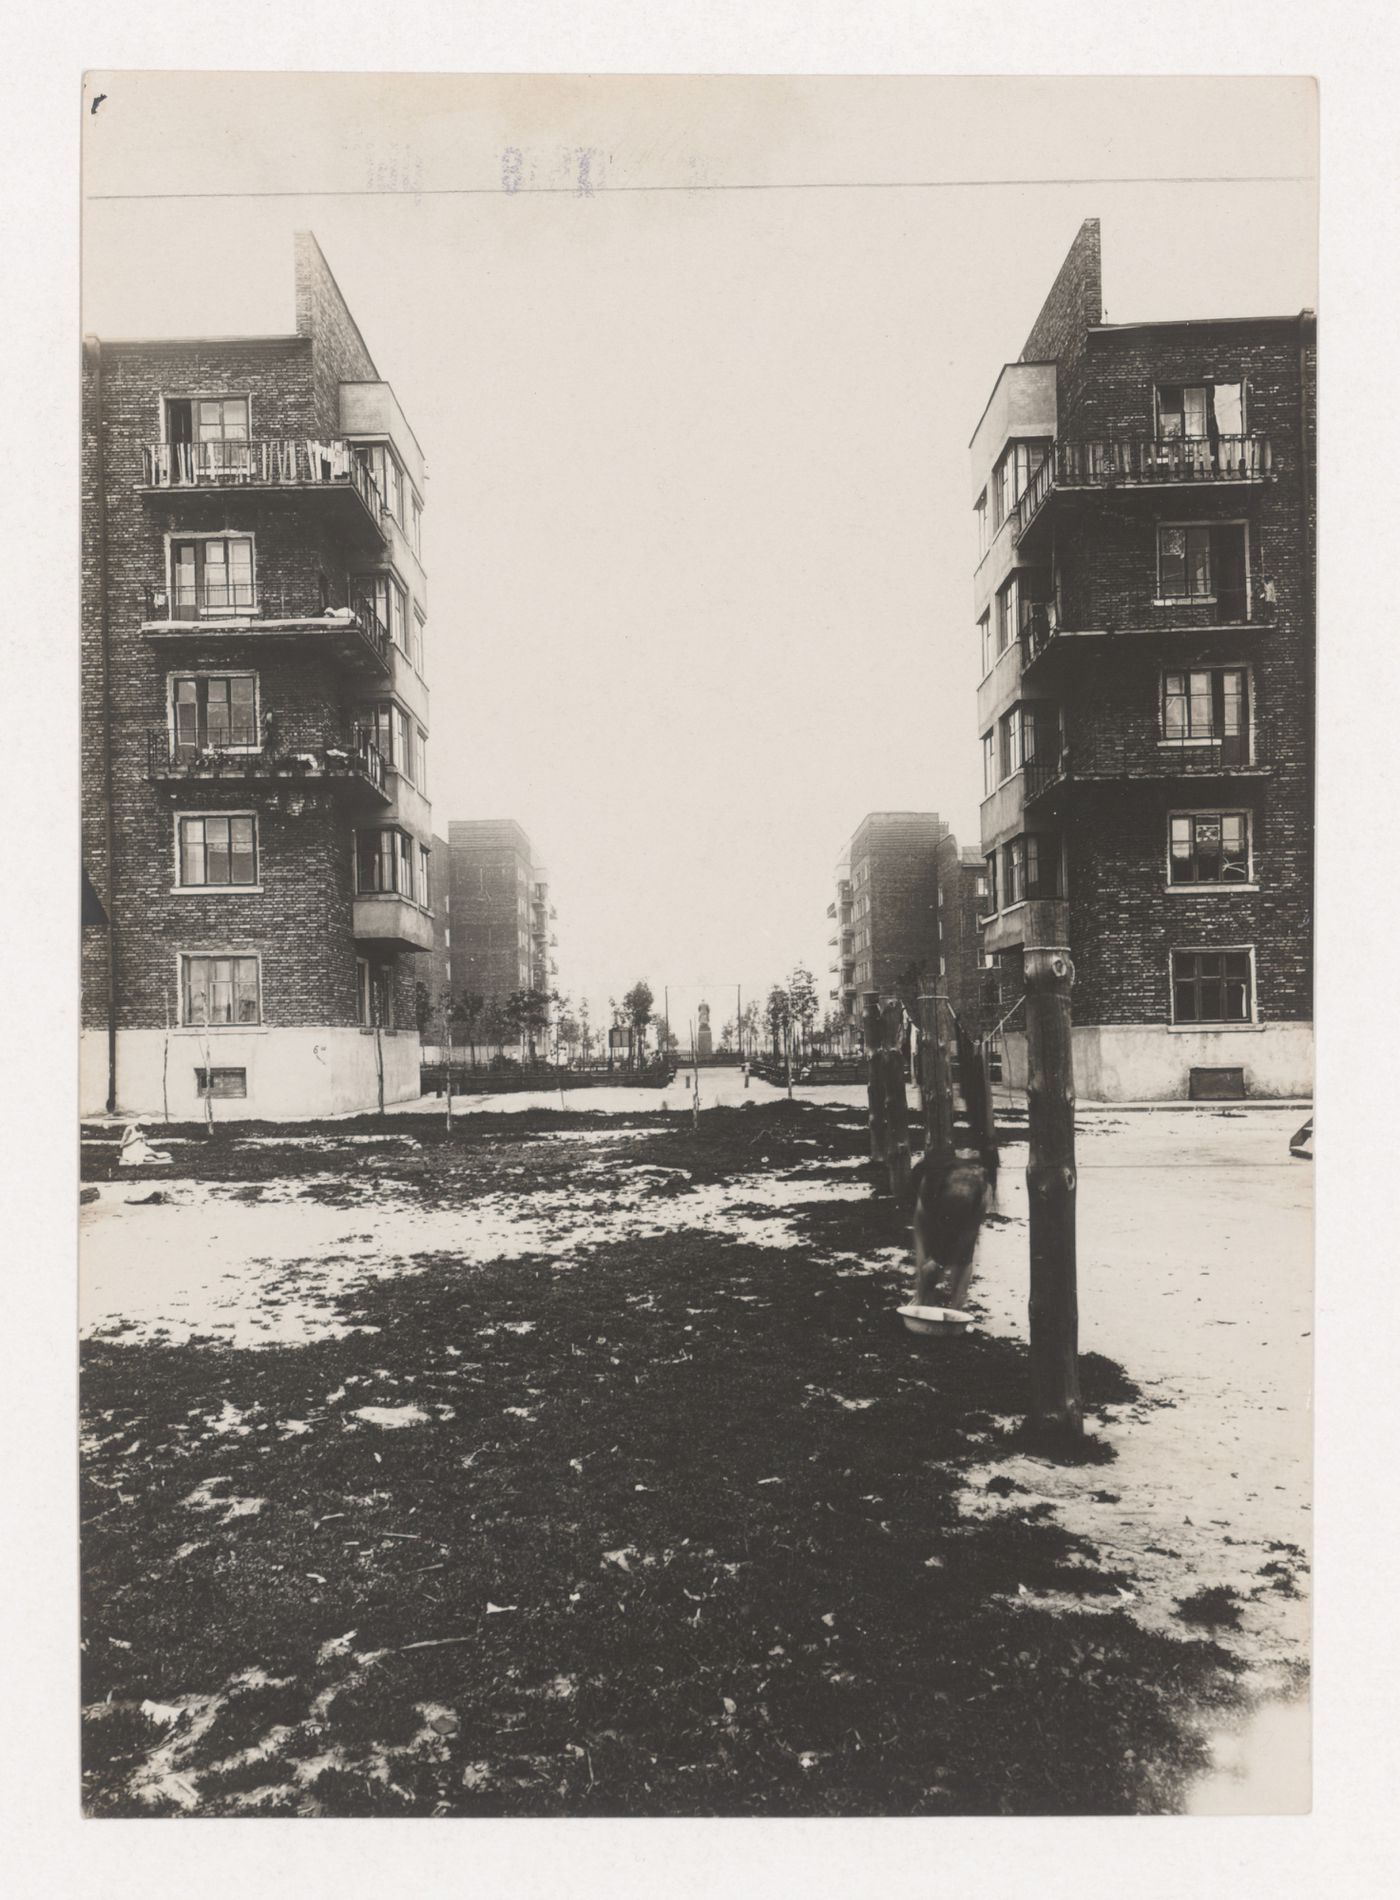 View of a courtyard in the Dangauerovka complex showing housing and a monument in the background, Moscow